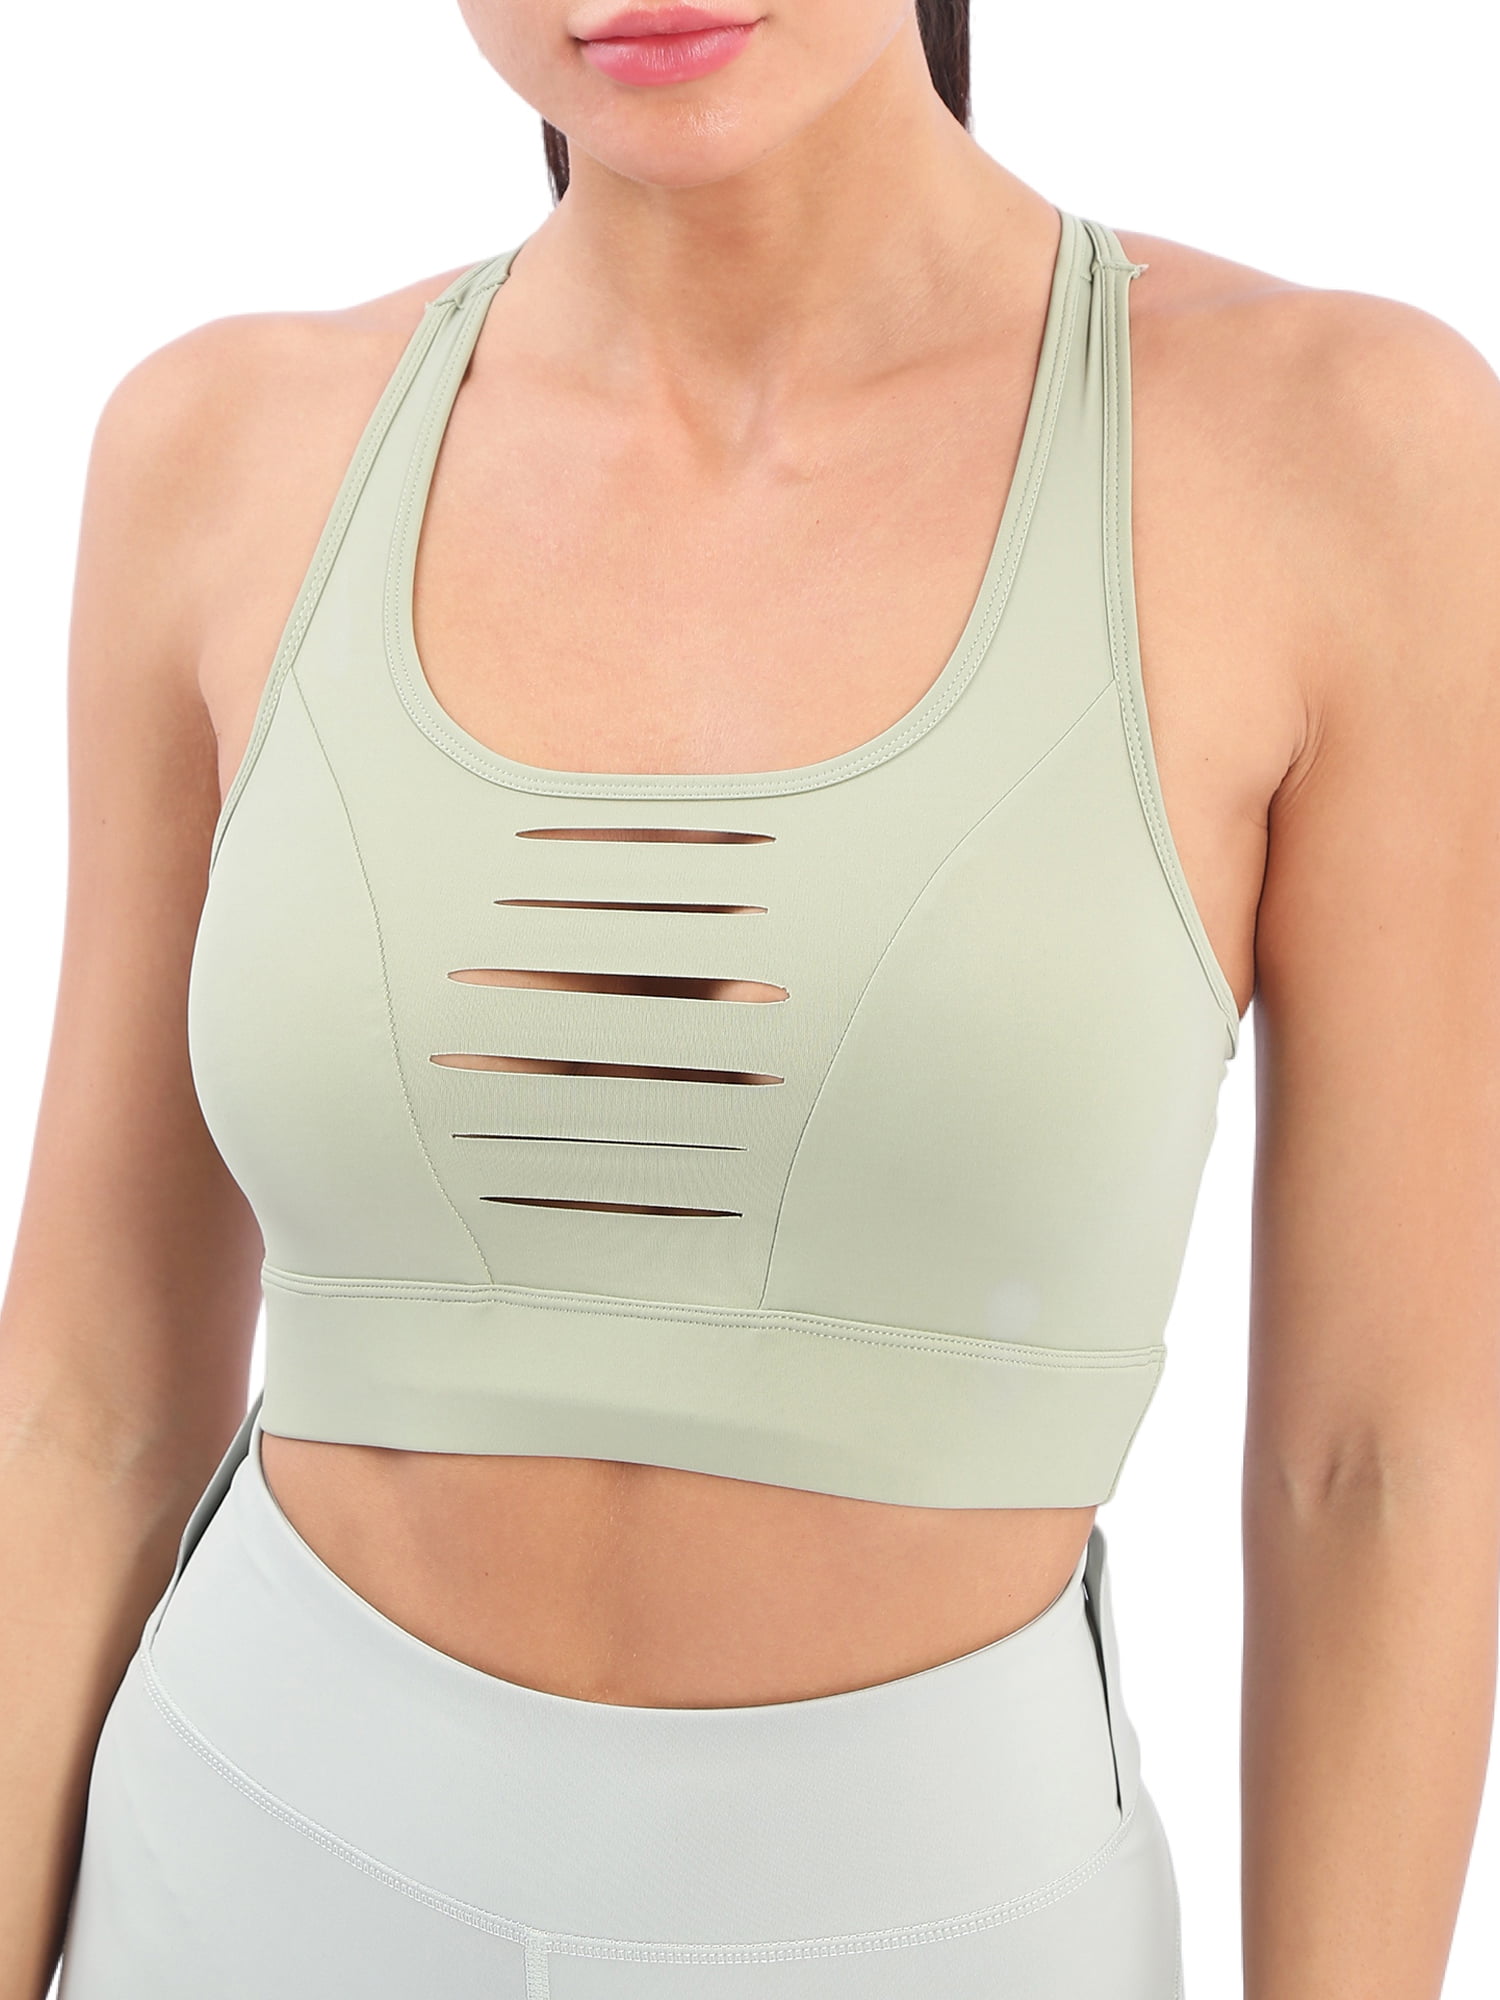 BALEAF Women's Workout Crop Tank Cropped Muscle Tops Cute Quick Dry Gym Yoga Shirts 